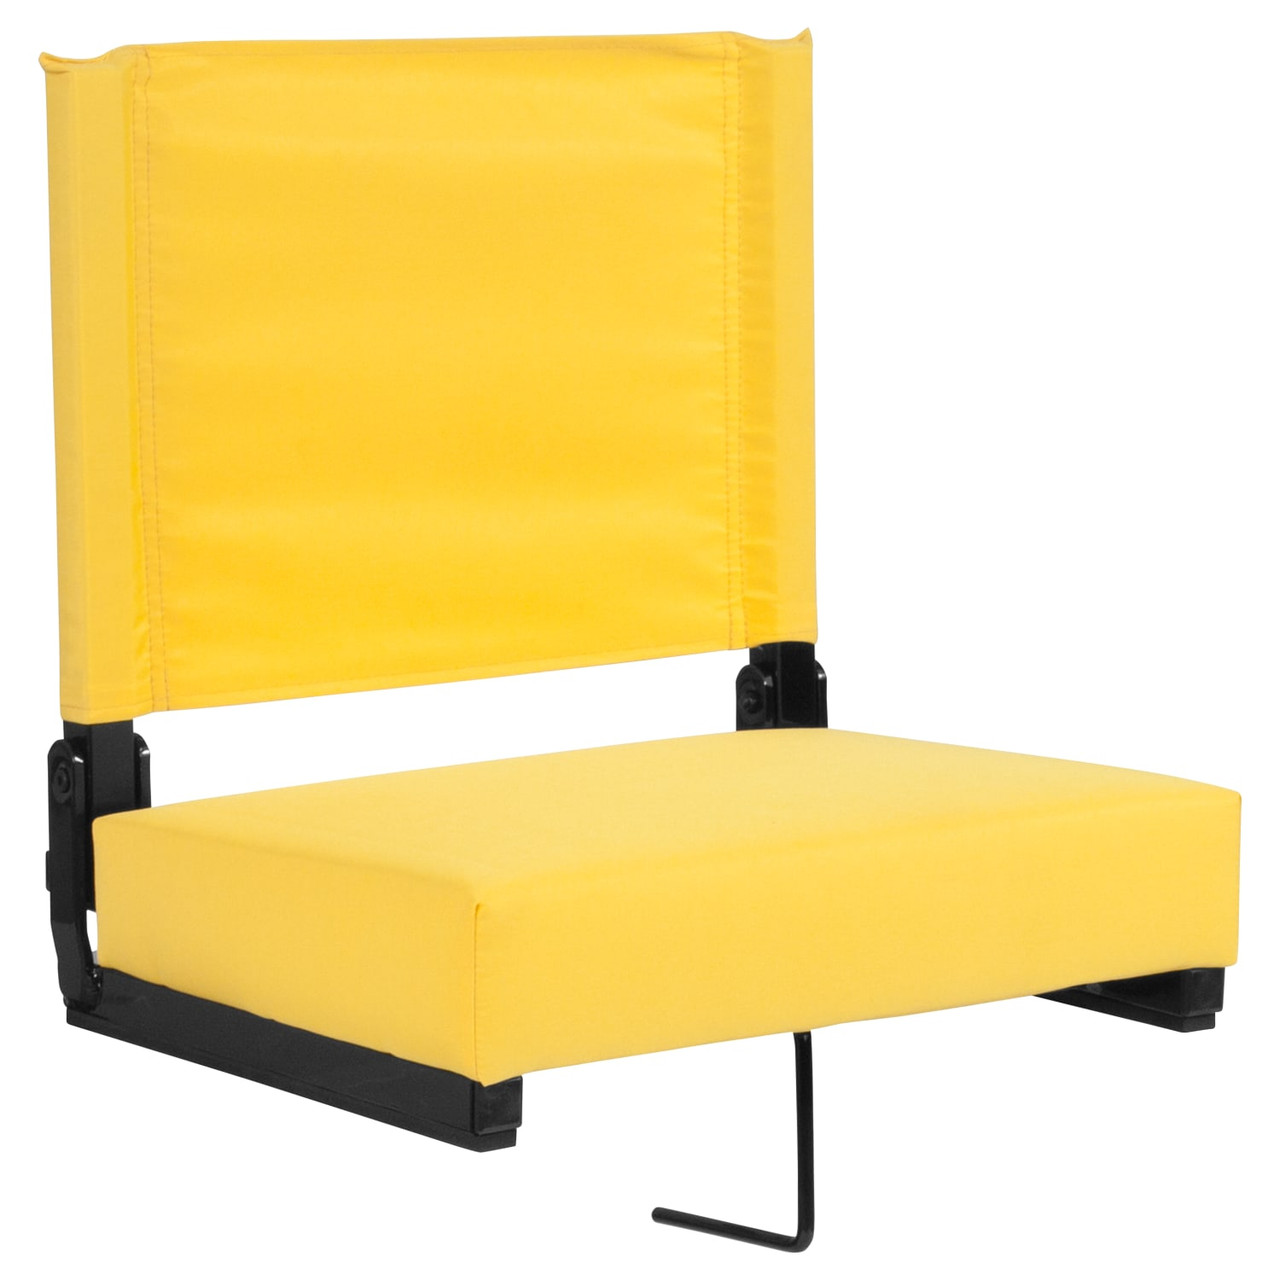 Grandstand Comfort Seats by Flash - Lightweight Stadium Chair with Handle & Ultra-Padded Seat, Yellow